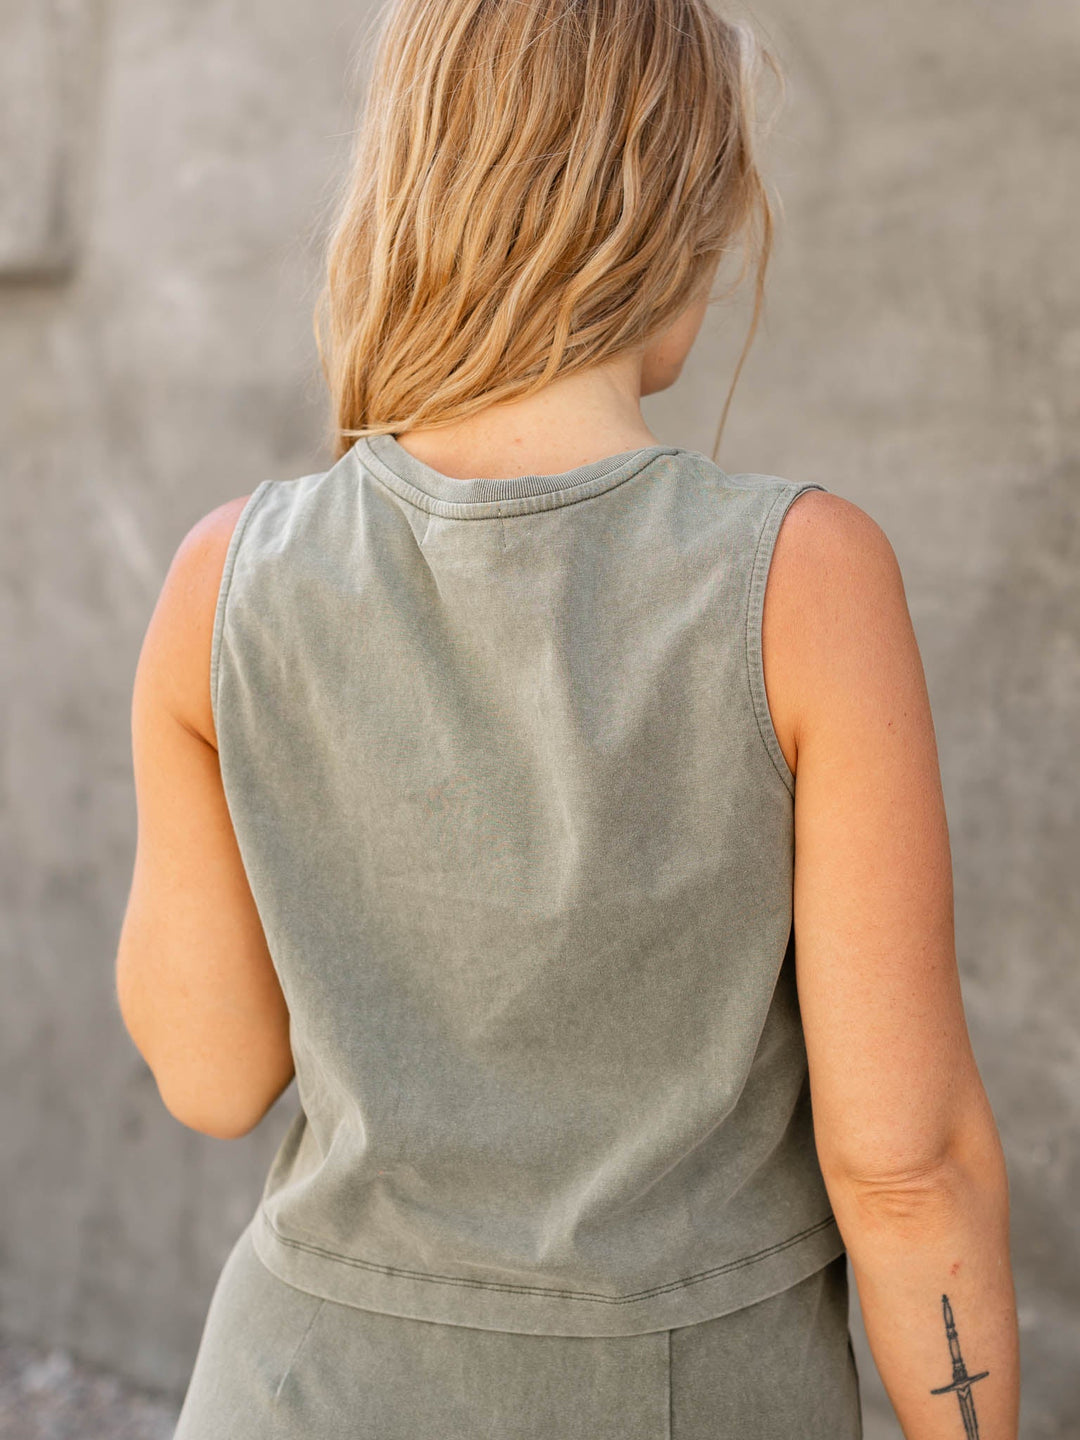 Mineral Washed Sleeveless TopKnit tops